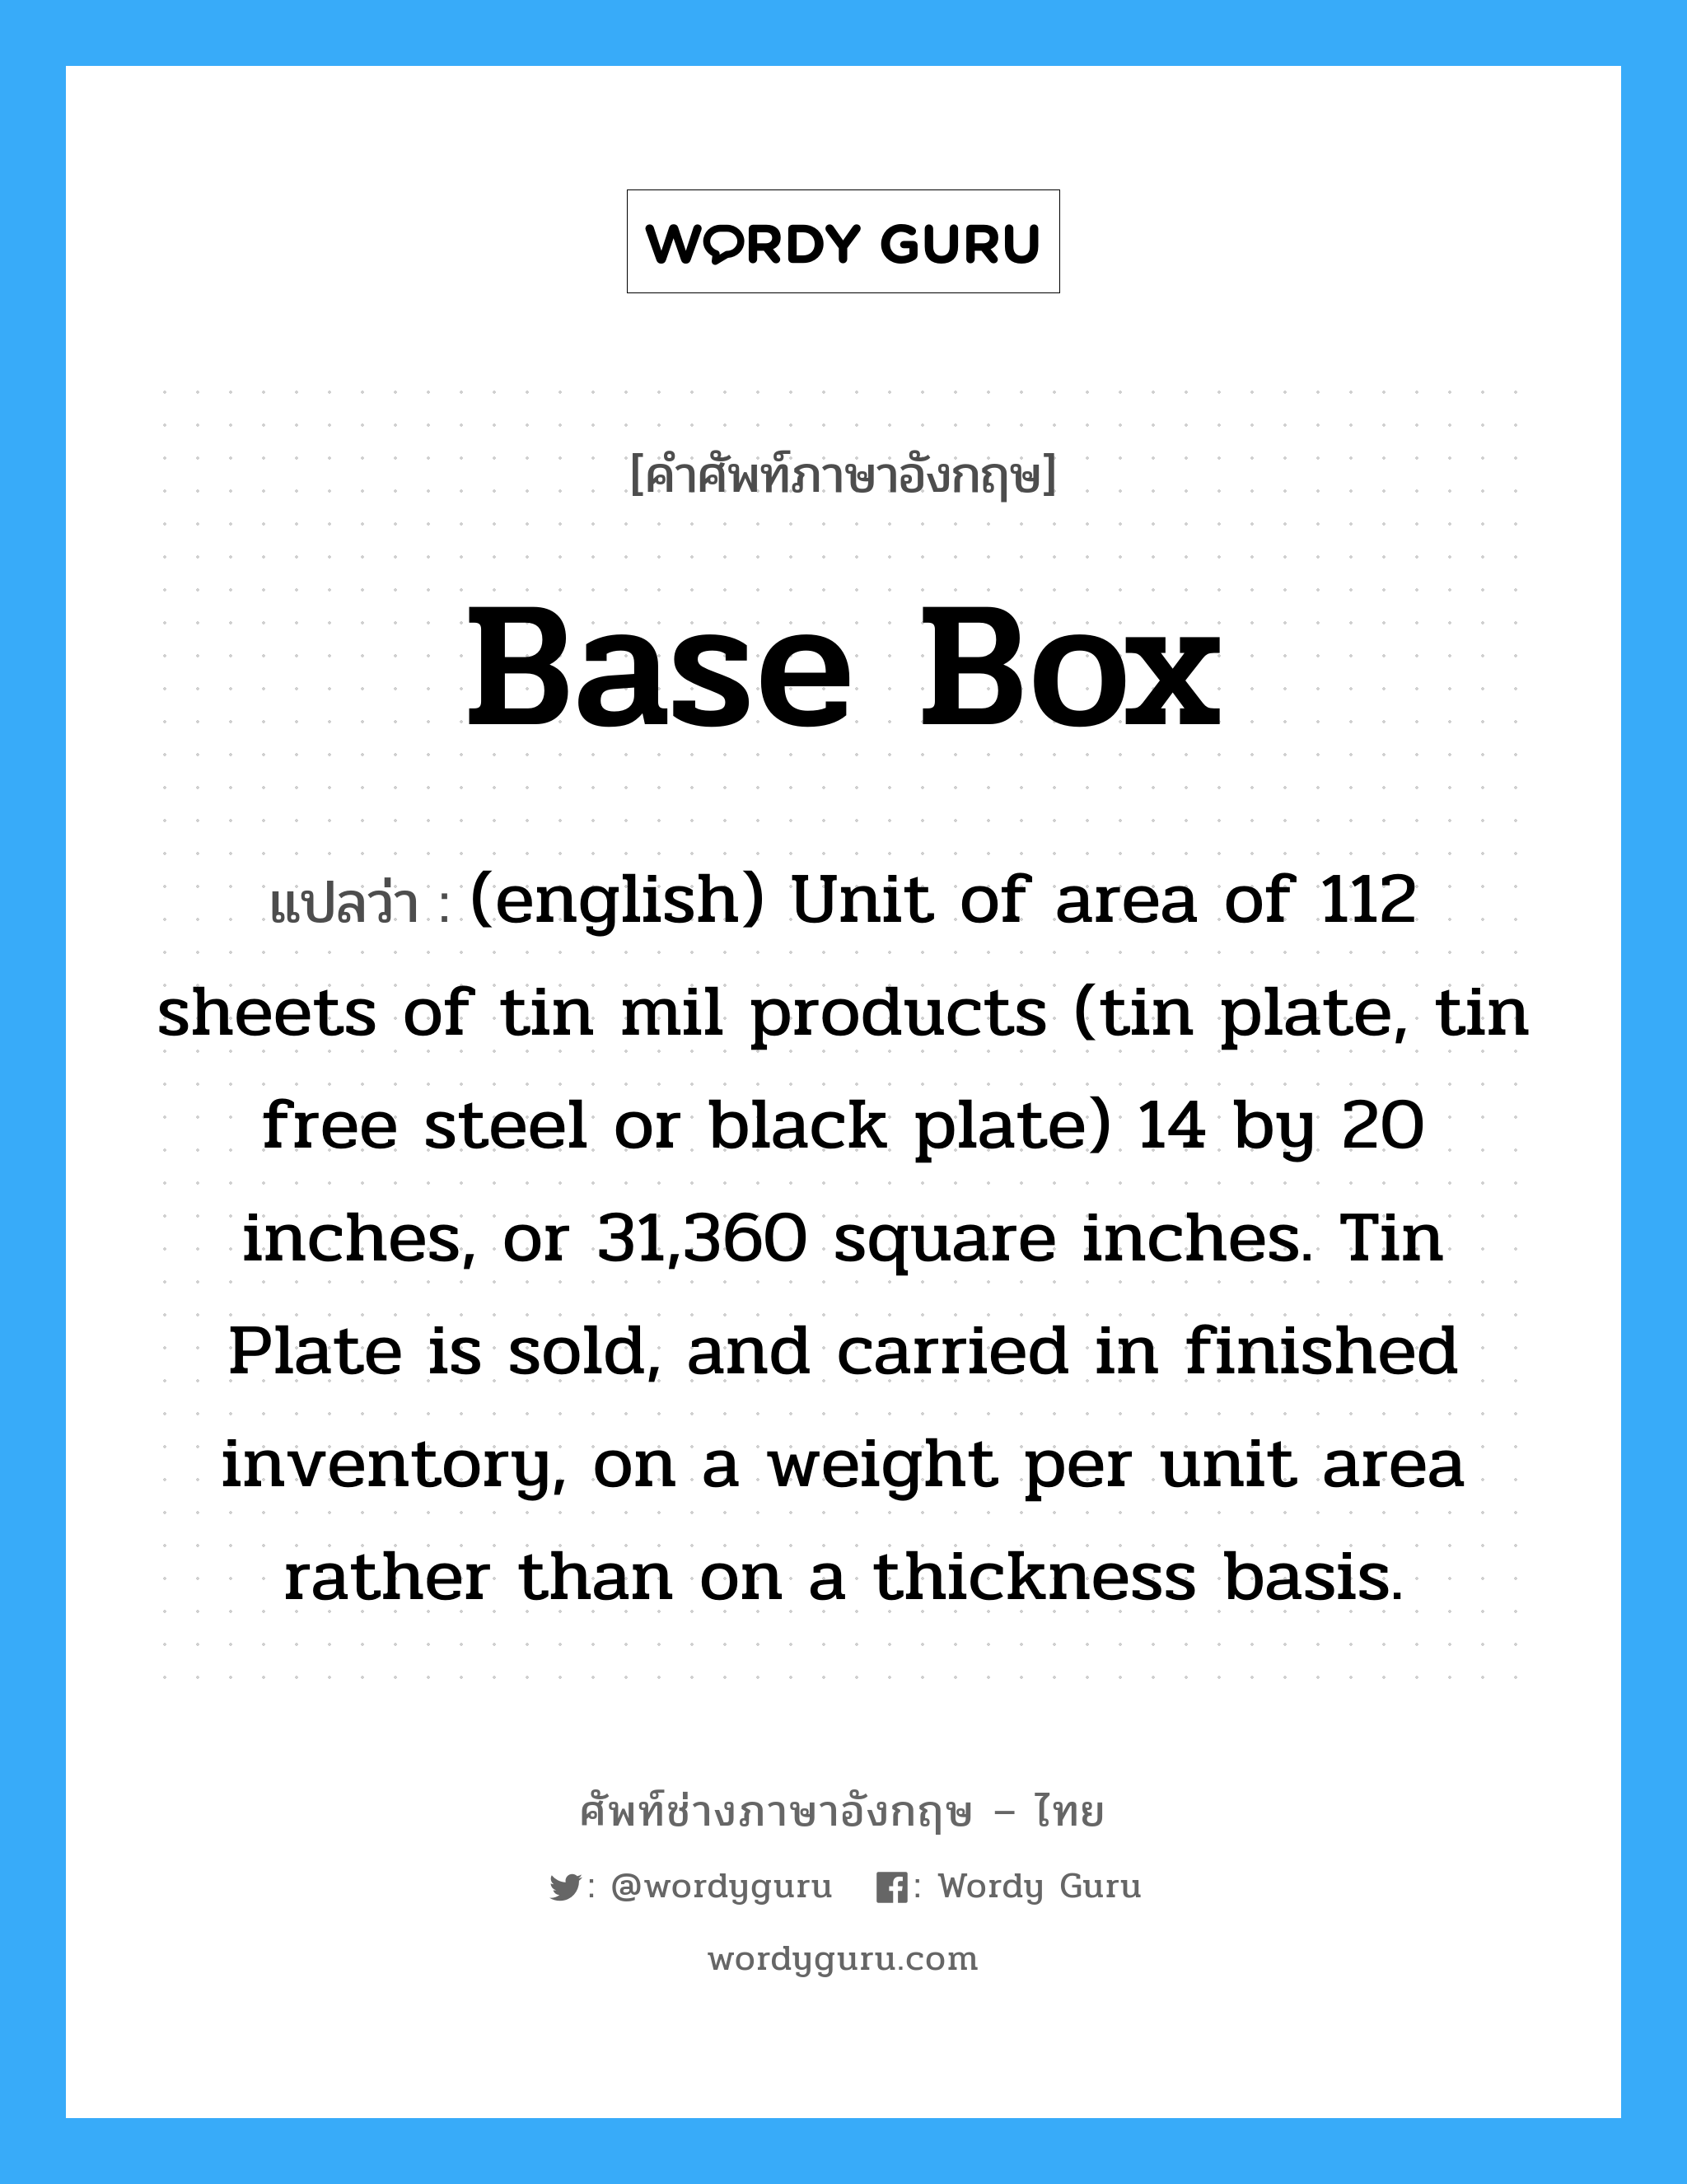 (english) Unit of area of 112 sheets of tin mil products (tin plate, tin free steel or black plate) 14 by 20 inches, or 31,360 square inches. Tin Plate is sold, and carried in finished inventory, on a weight per unit area rather than on a thickness basis. ภาษาอังกฤษ?, คำศัพท์ช่างภาษาอังกฤษ - ไทย (english) Unit of area of 112 sheets of tin mil products (tin plate, tin free steel or black plate) 14 by 20 inches, or 31,360 square inches. Tin Plate is sold, and carried in finished inventory, on a weight per unit area rather than on a thickness basis. คำศัพท์ภาษาอังกฤษ (english) Unit of area of 112 sheets of tin mil products (tin plate, tin free steel or black plate) 14 by 20 inches, or 31,360 square inches. Tin Plate is sold, and carried in finished inventory, on a weight per unit area rather than on a thickness basis. แปลว่า Base Box